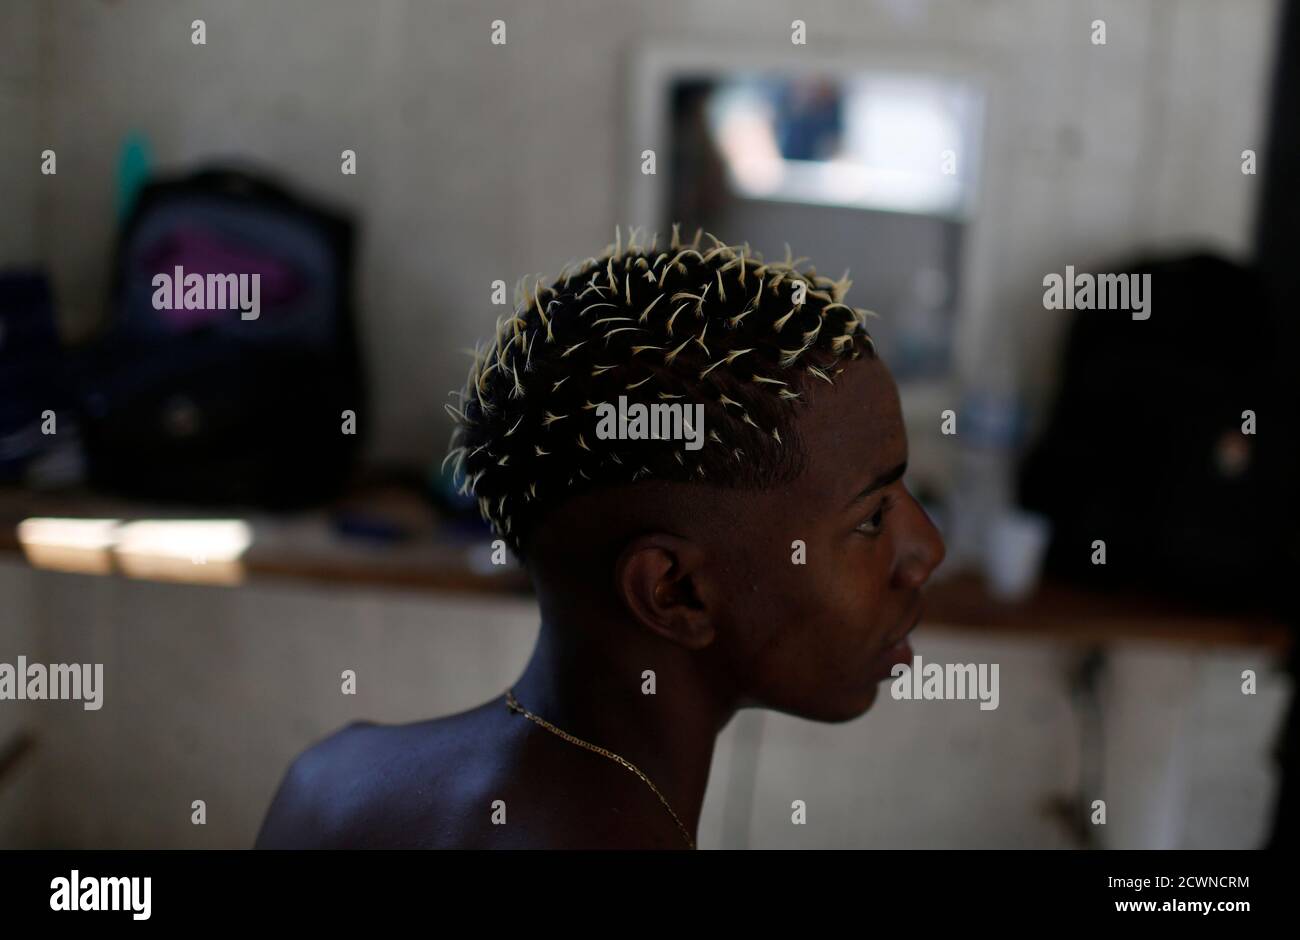 Diogo A Client Talks To His Barber After Having A Dye Design On His Hair Done At The Barbearia Kengao Barber Shop In A Slum In Rio De Janeiro September 13 2014